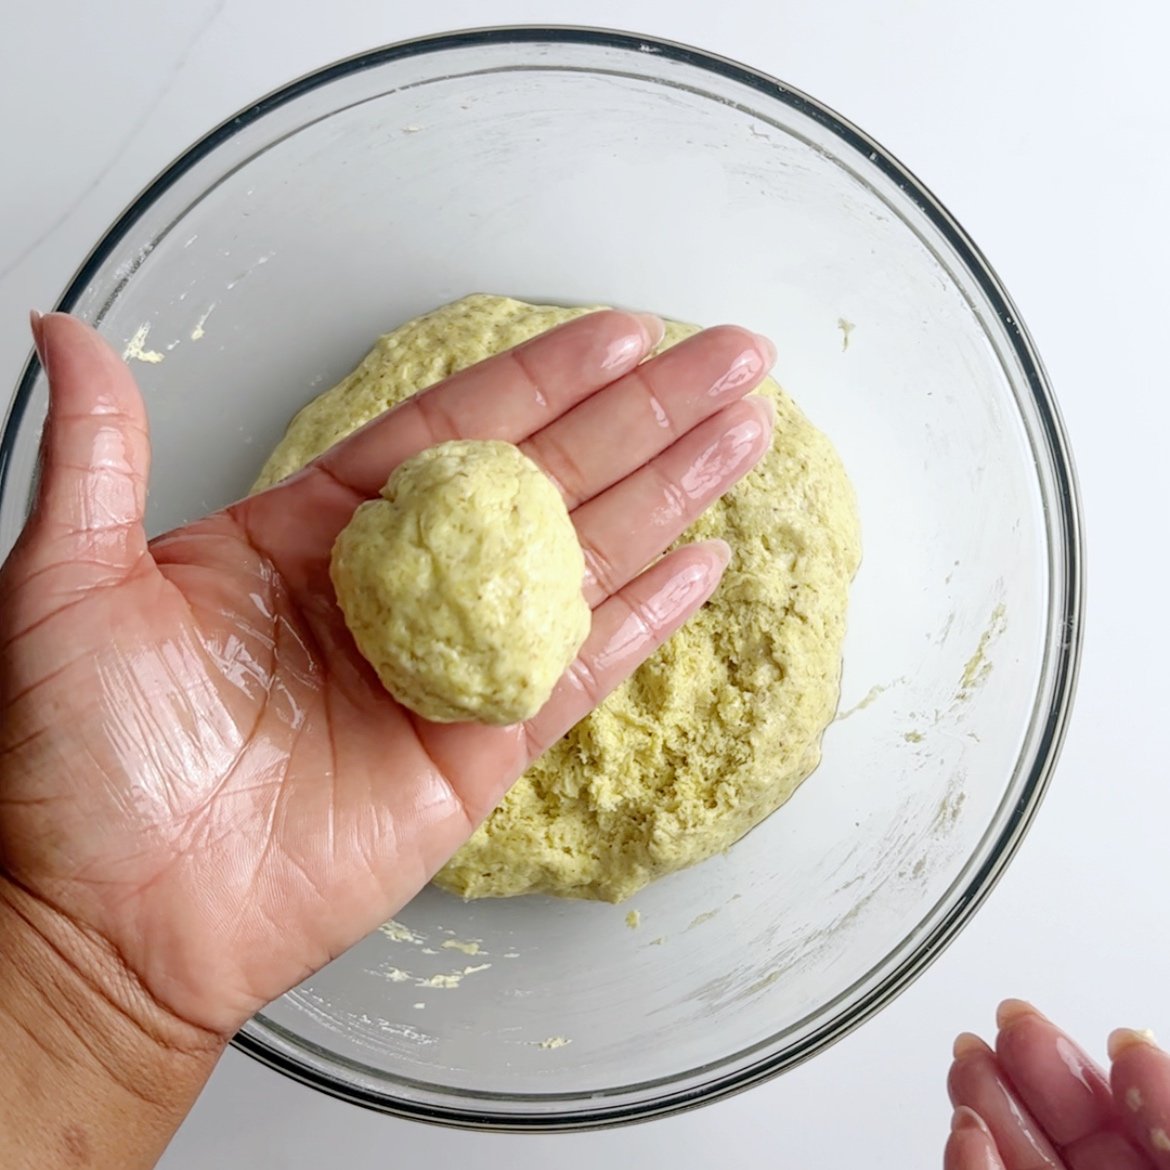 brown hand holding a ball of gluten free bara dough over a glass bowl with more dough